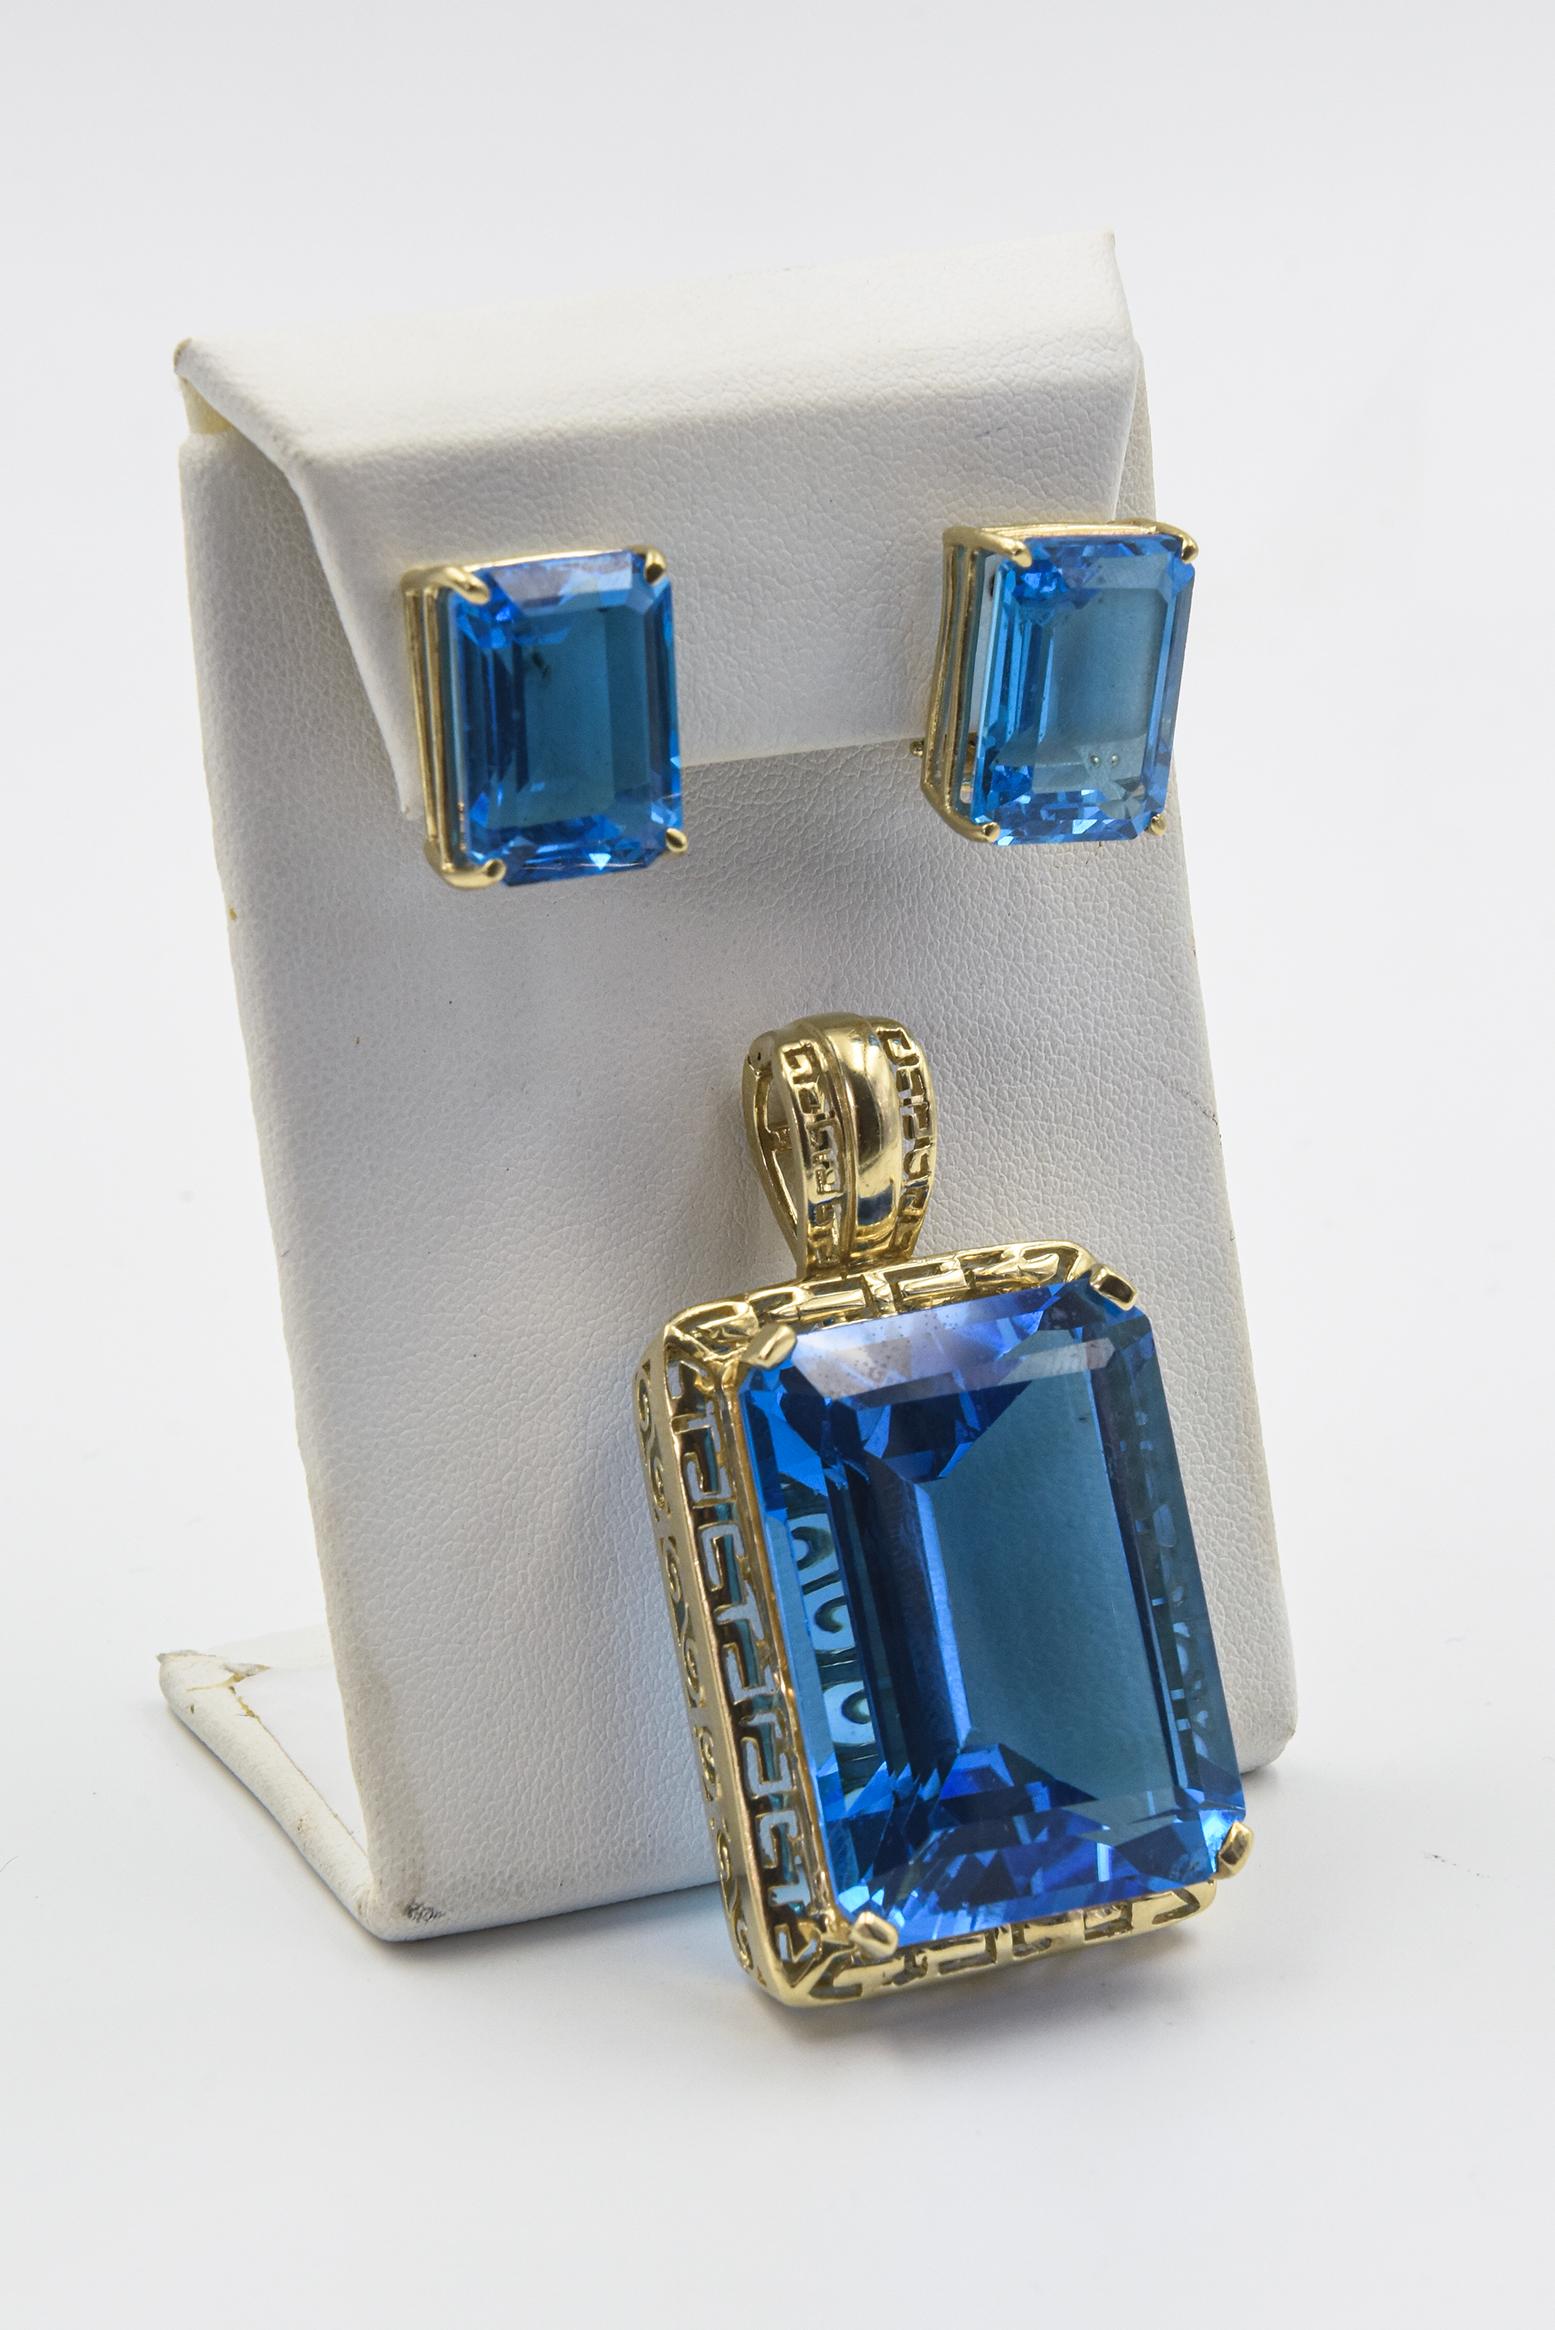 Large Emerald Cut Blue Topaz Yellow Gold Pendant with Matching Earrings For Sale 4